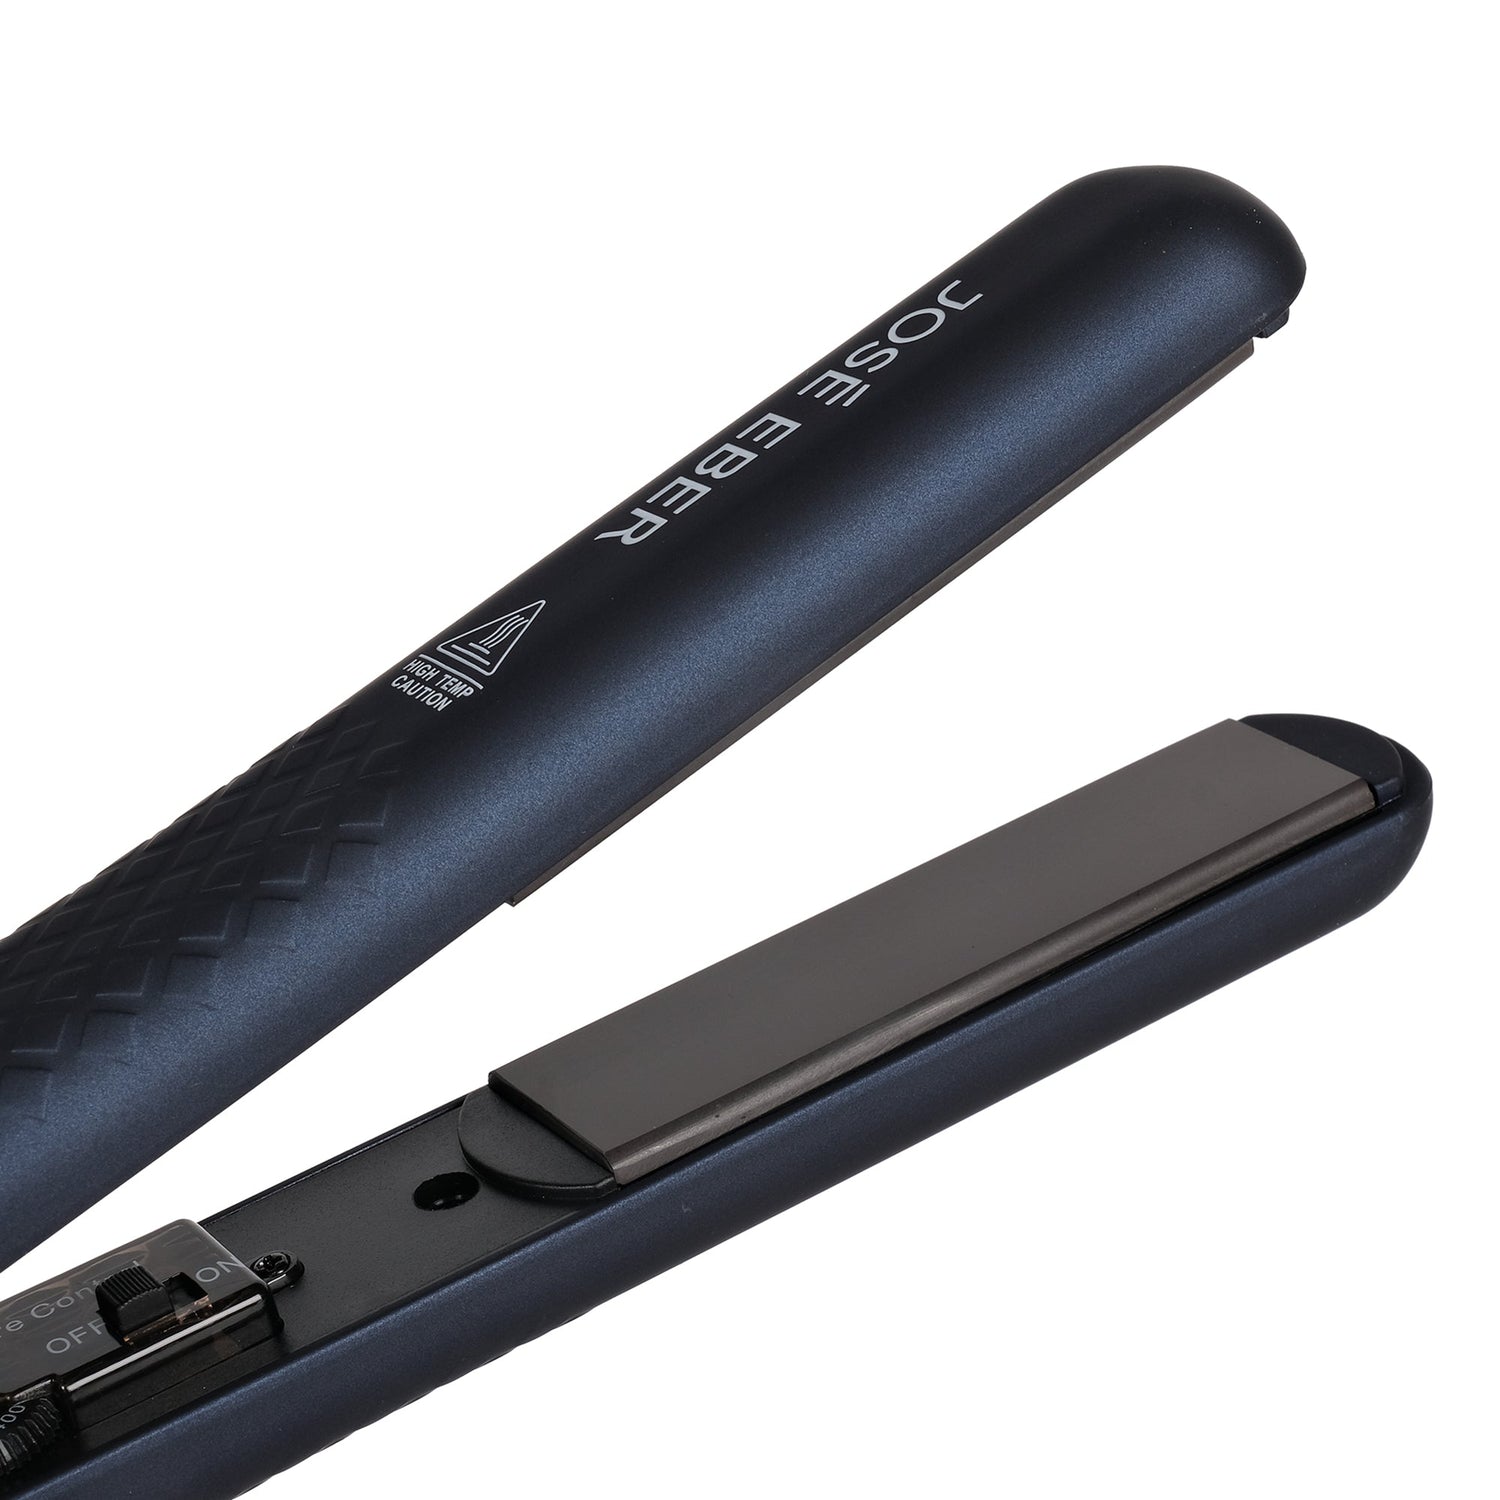 Jose Eber Pure Ceramic Flat Iron - Premium Hair Straightener for Salon Quality Results - Blue - Couture Hair Pro